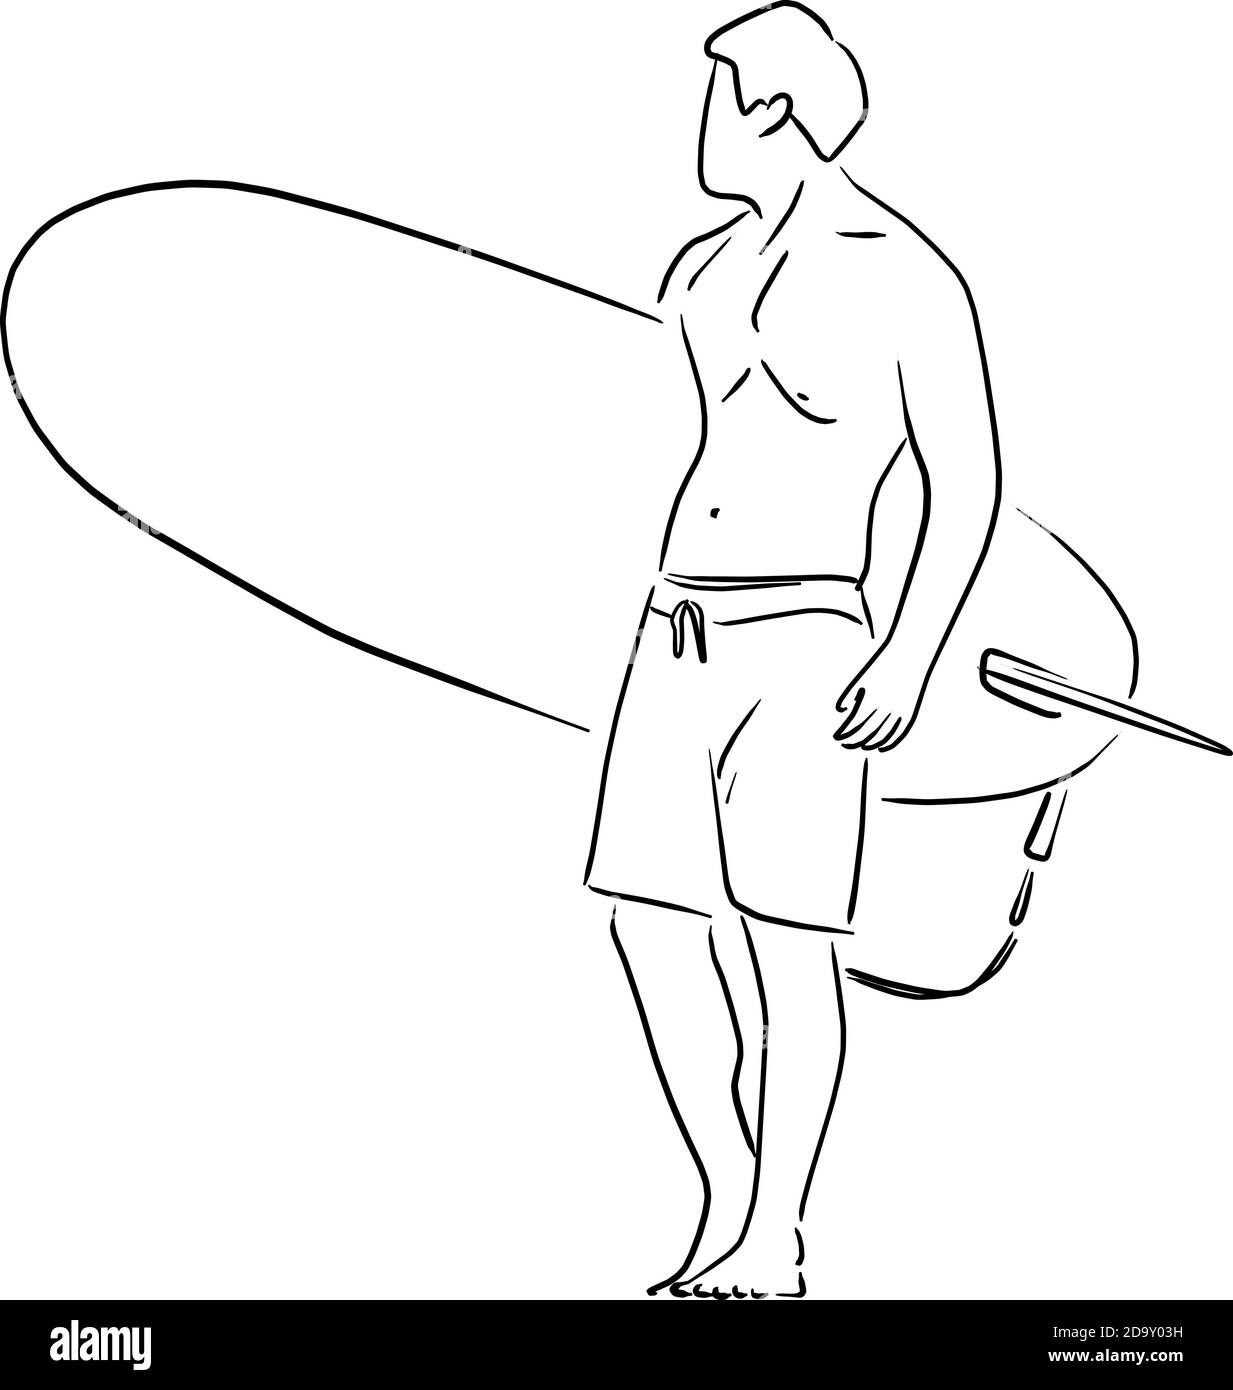 Men in shorts holding surfboard vector illustration sketch doodle hand drawn with black lines isolated on white background Stock Vector